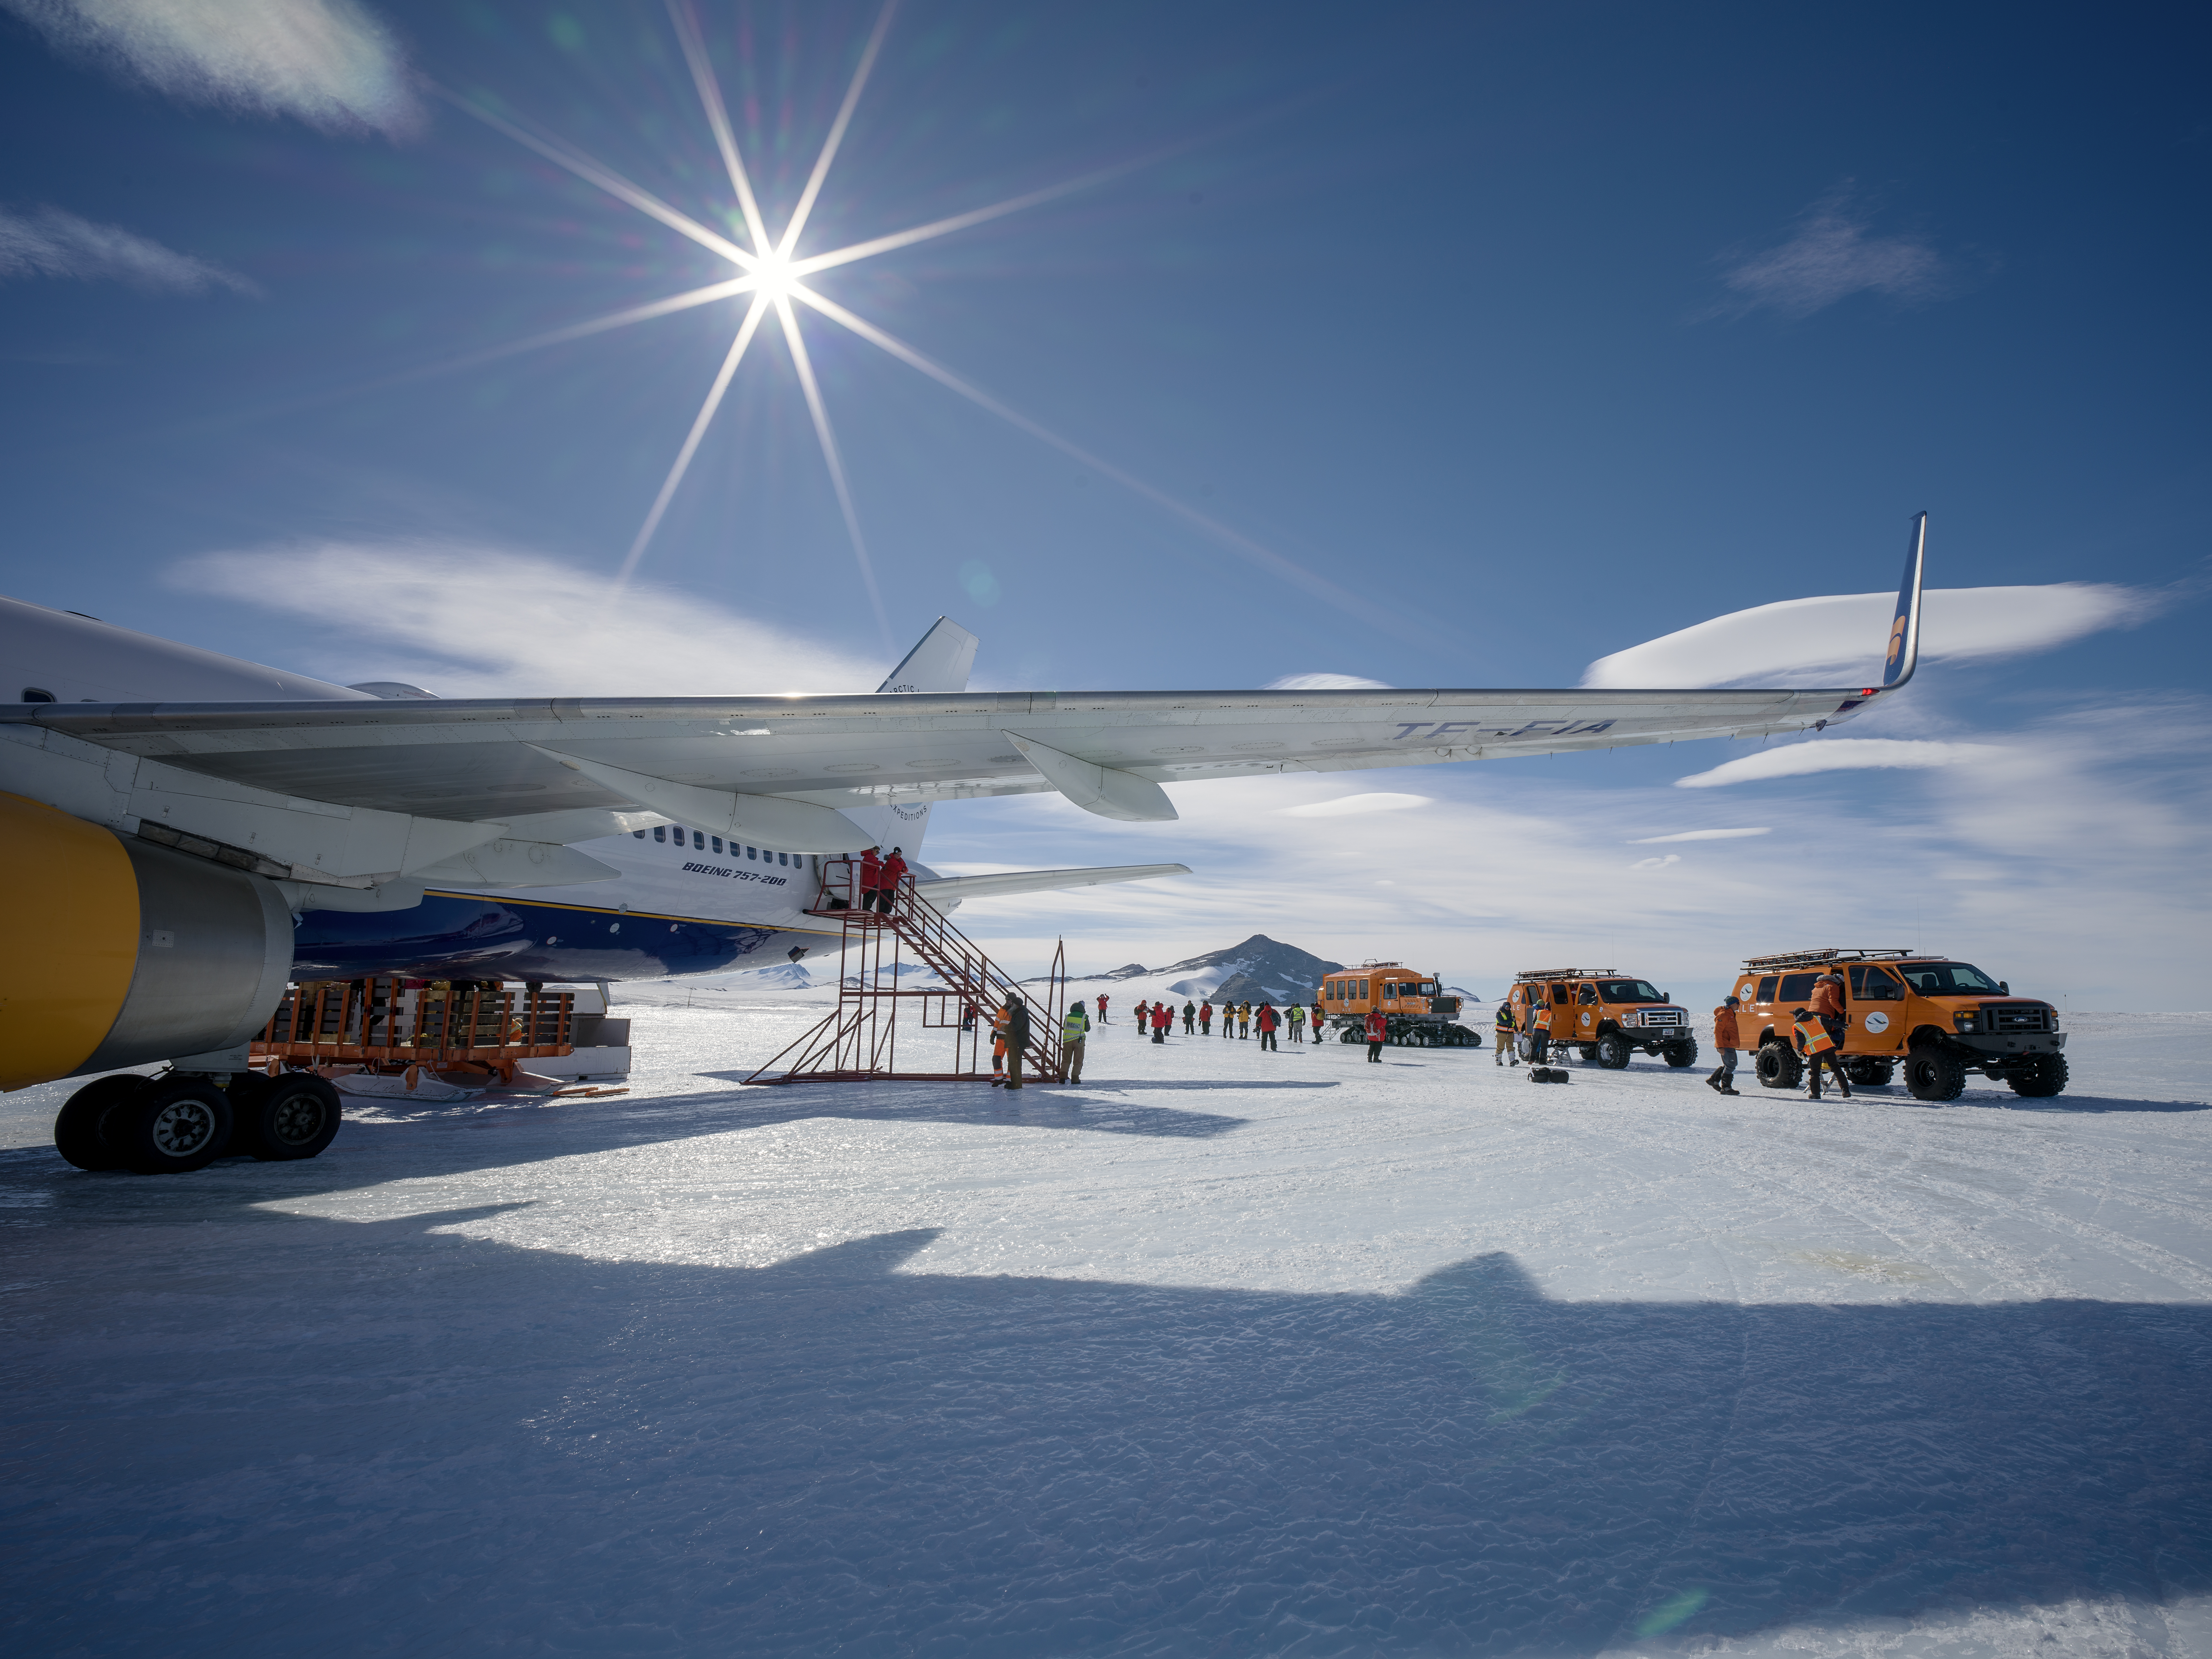 Guests board waiting shuttle vehicles after landing in Antarctica